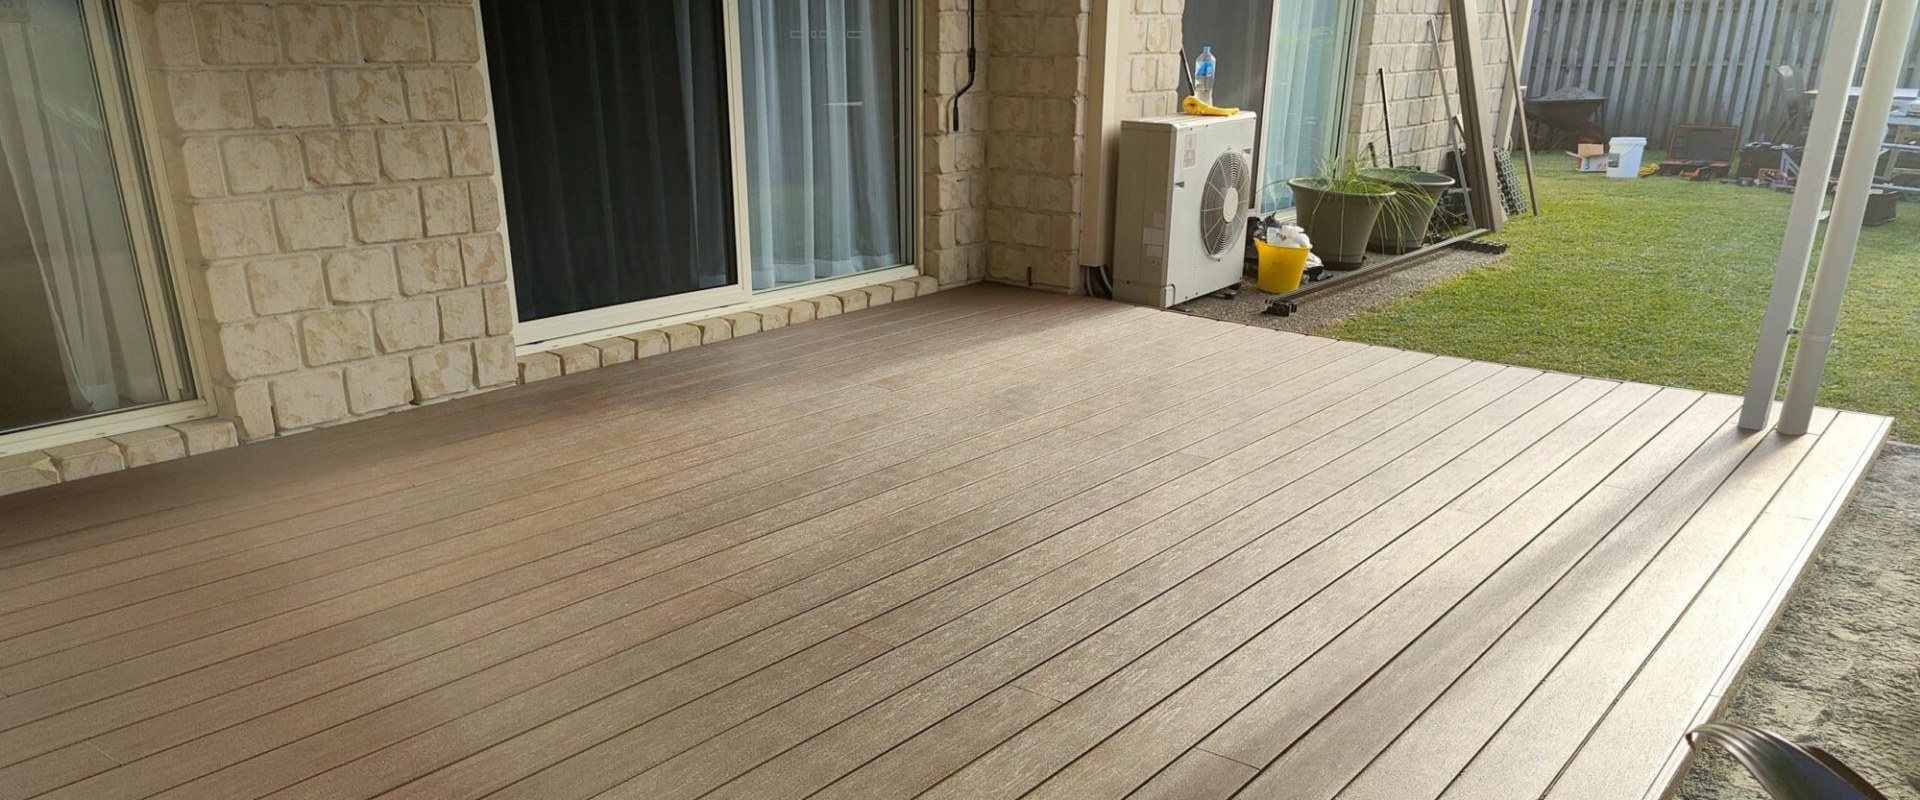 Composite Decking: The Ideal Solution for Construction Engineering Projects In Melbourne